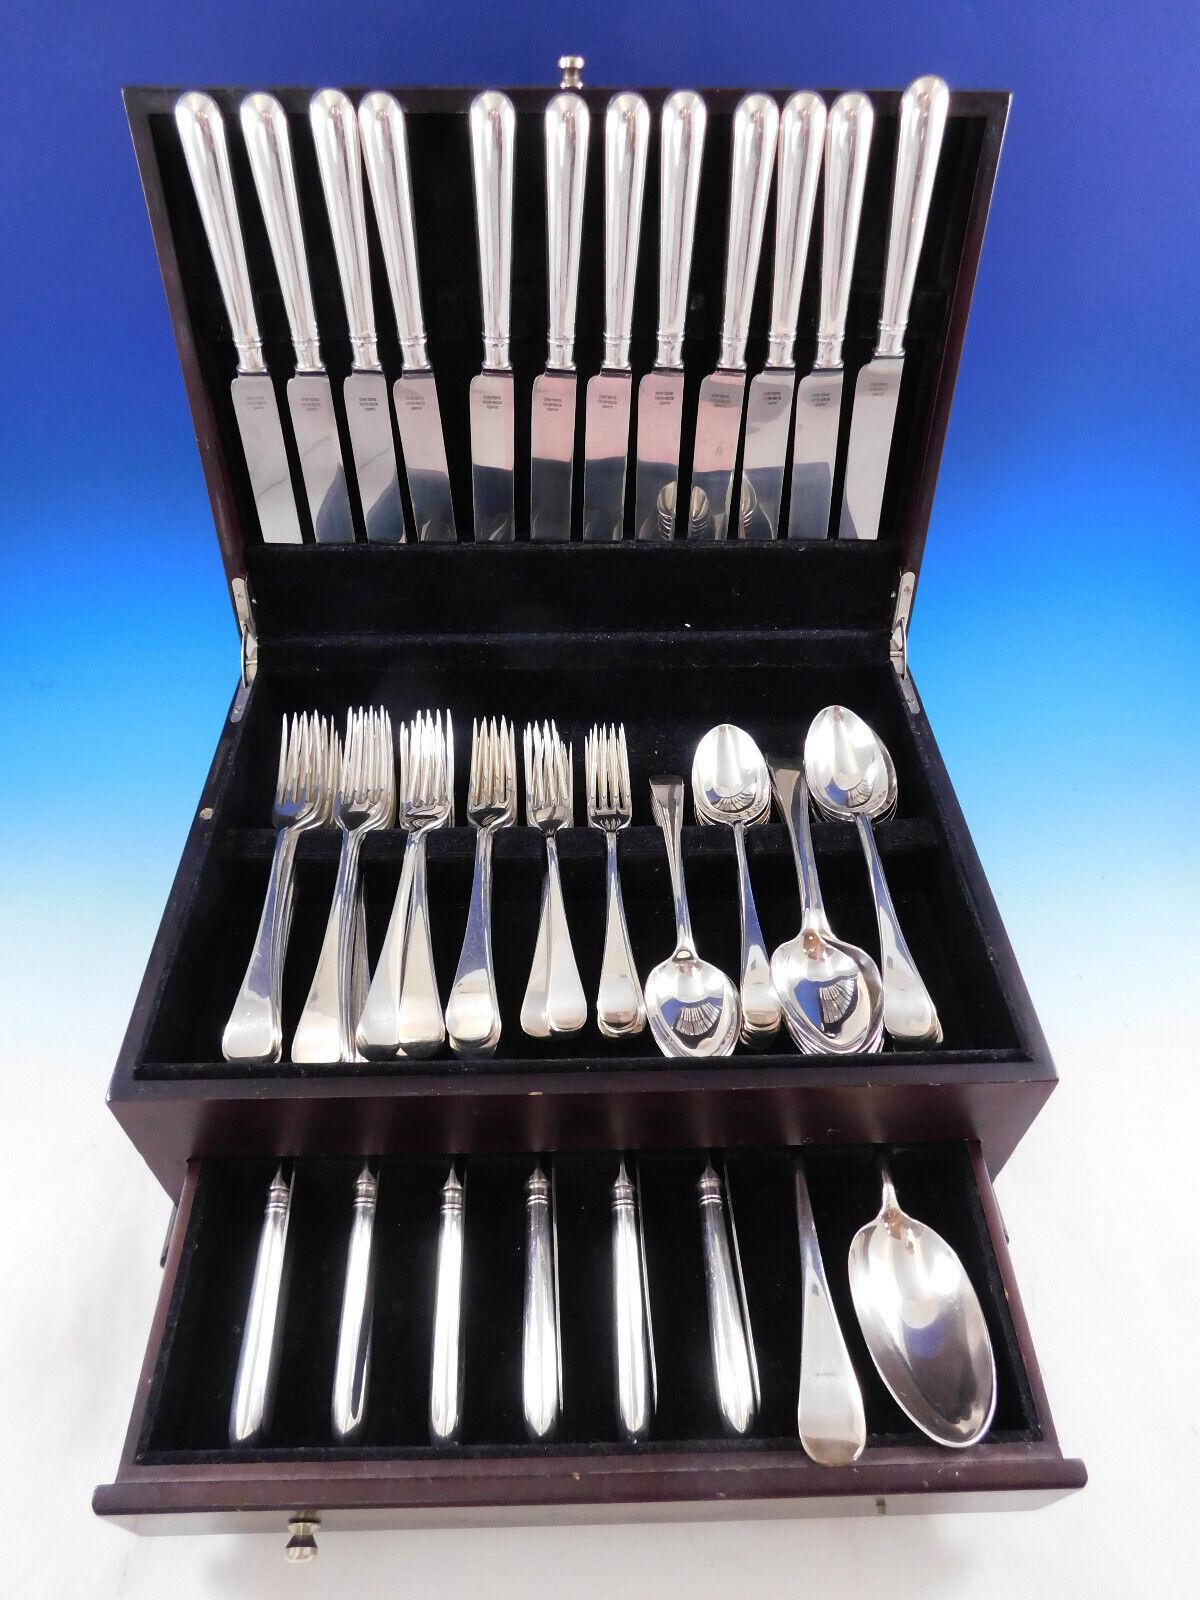 Irish Rib BY JAMES ROBINSON

For 70 years, James Robinson has been selling exquisite handmade sterling silver flatware in Sheffield, England. Today, the silver is still made in the traditional way. They start with a rectangular strip of silver,